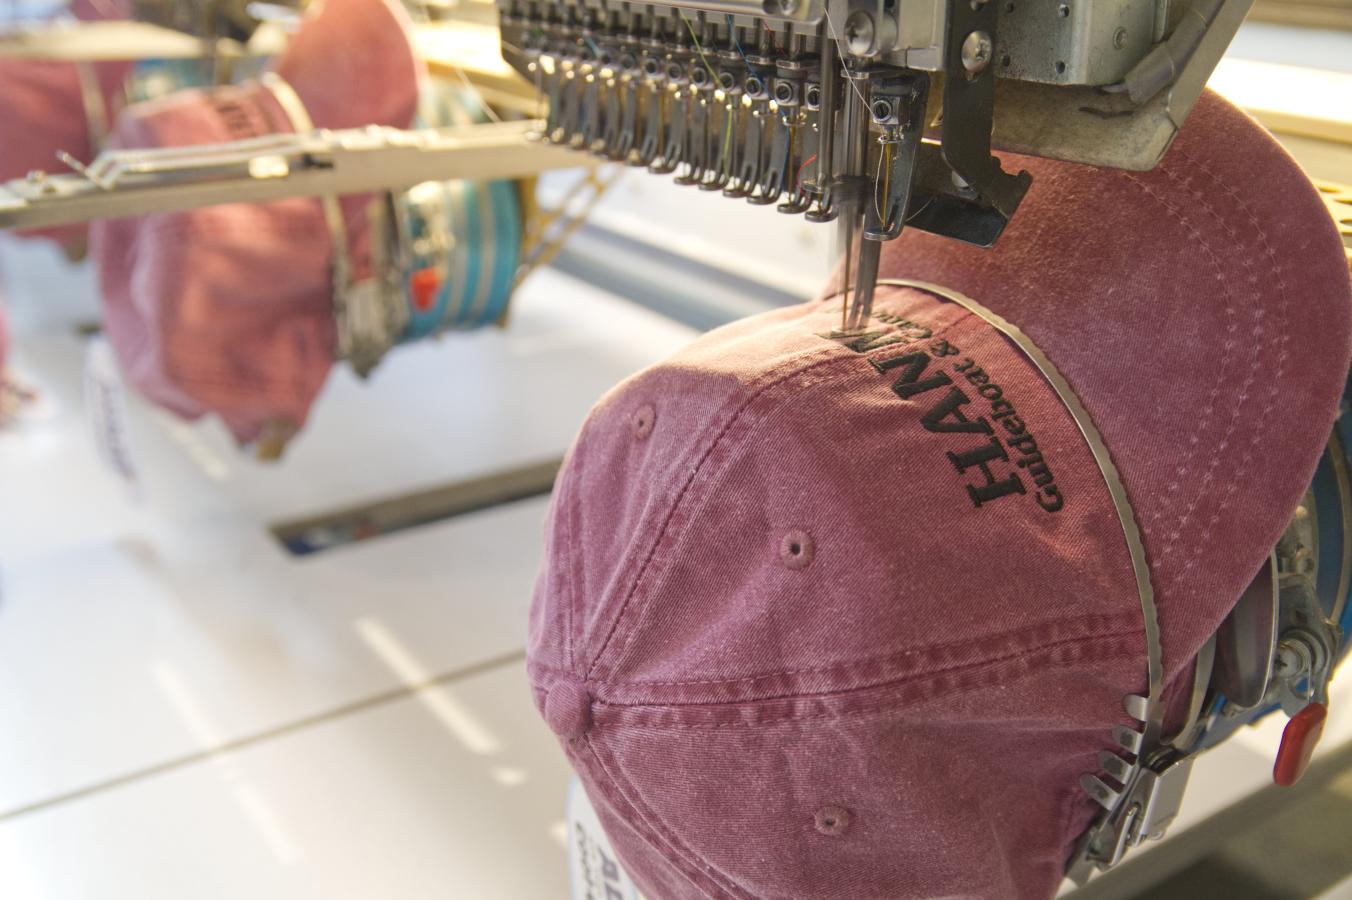 Hats in production at Bear Essentials Embroidery 